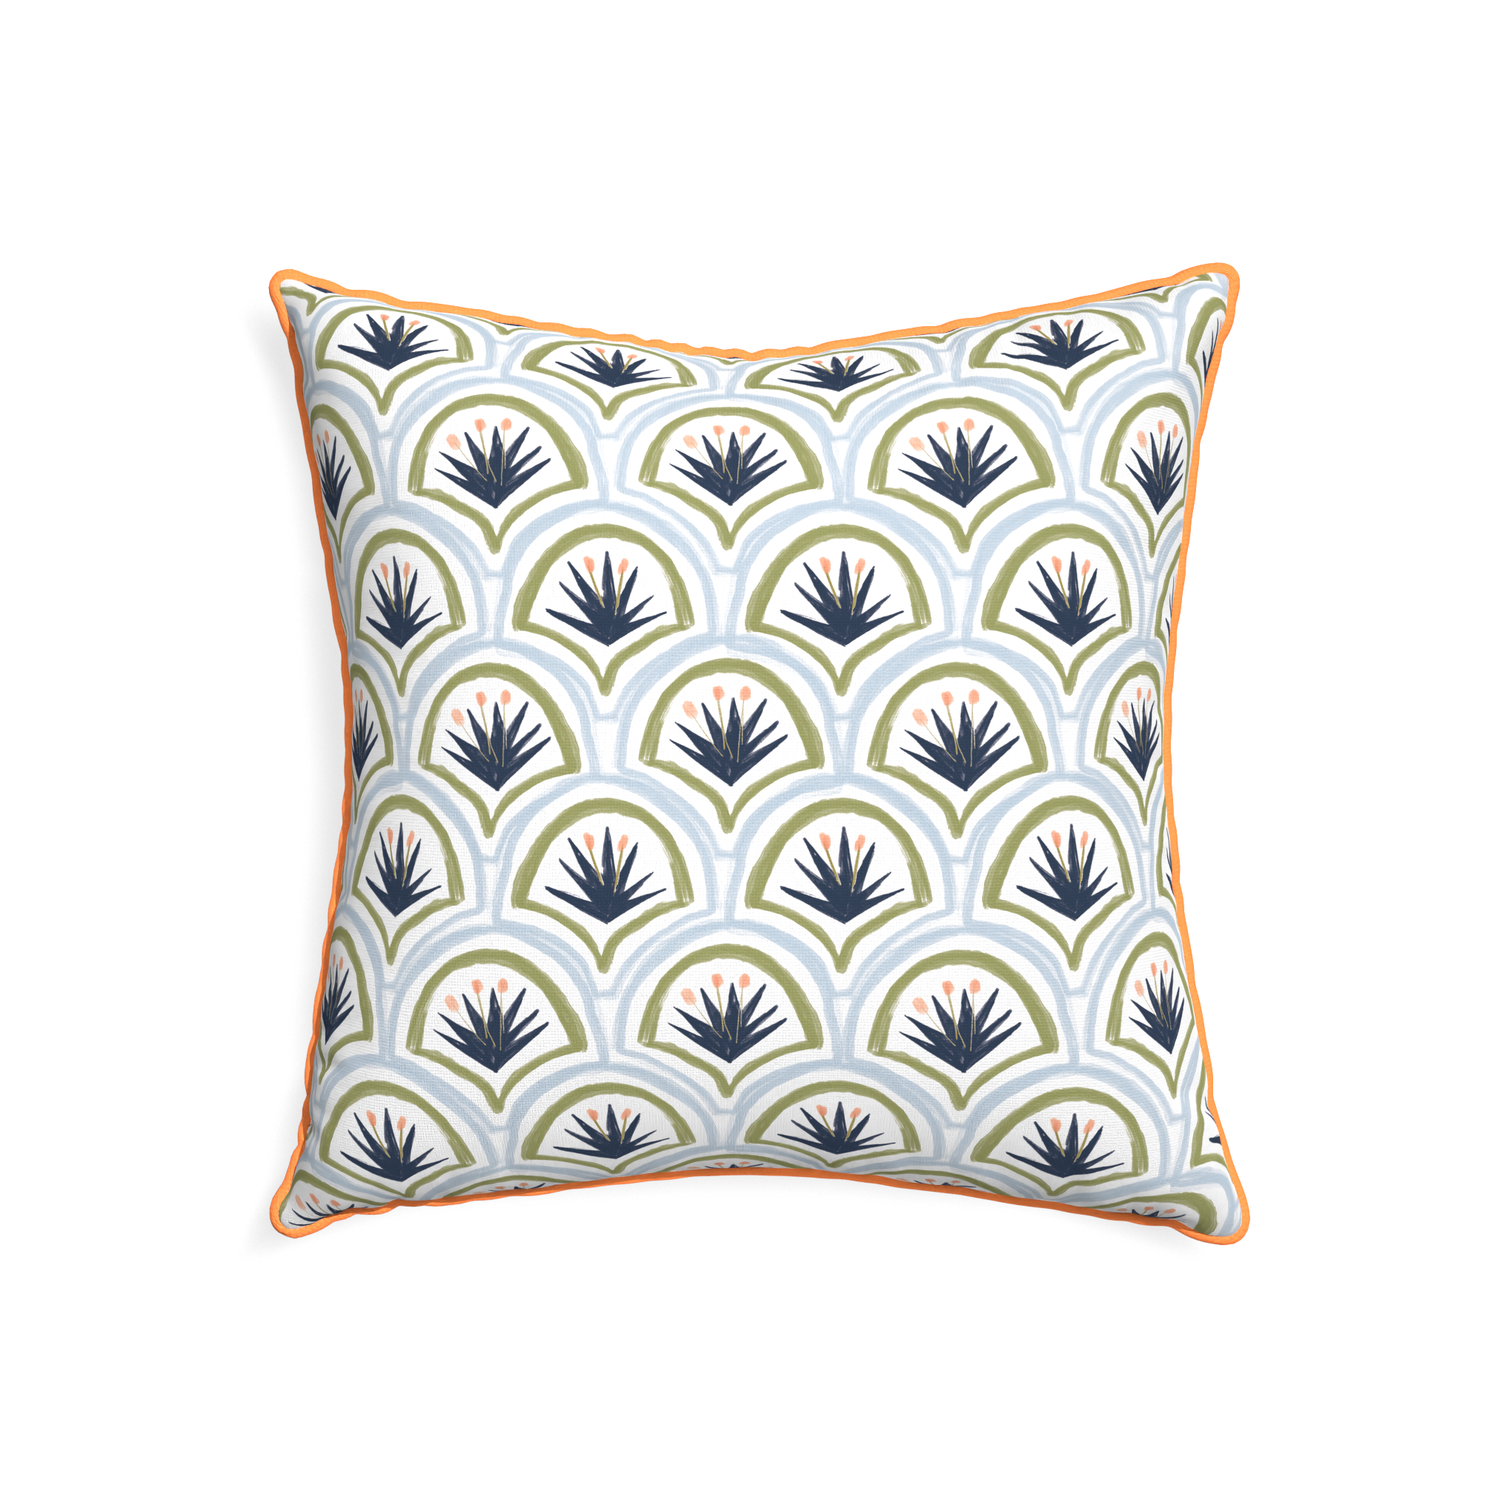 22-square thatcher midnight custom art deco palm patternpillow with clementine piping on white background